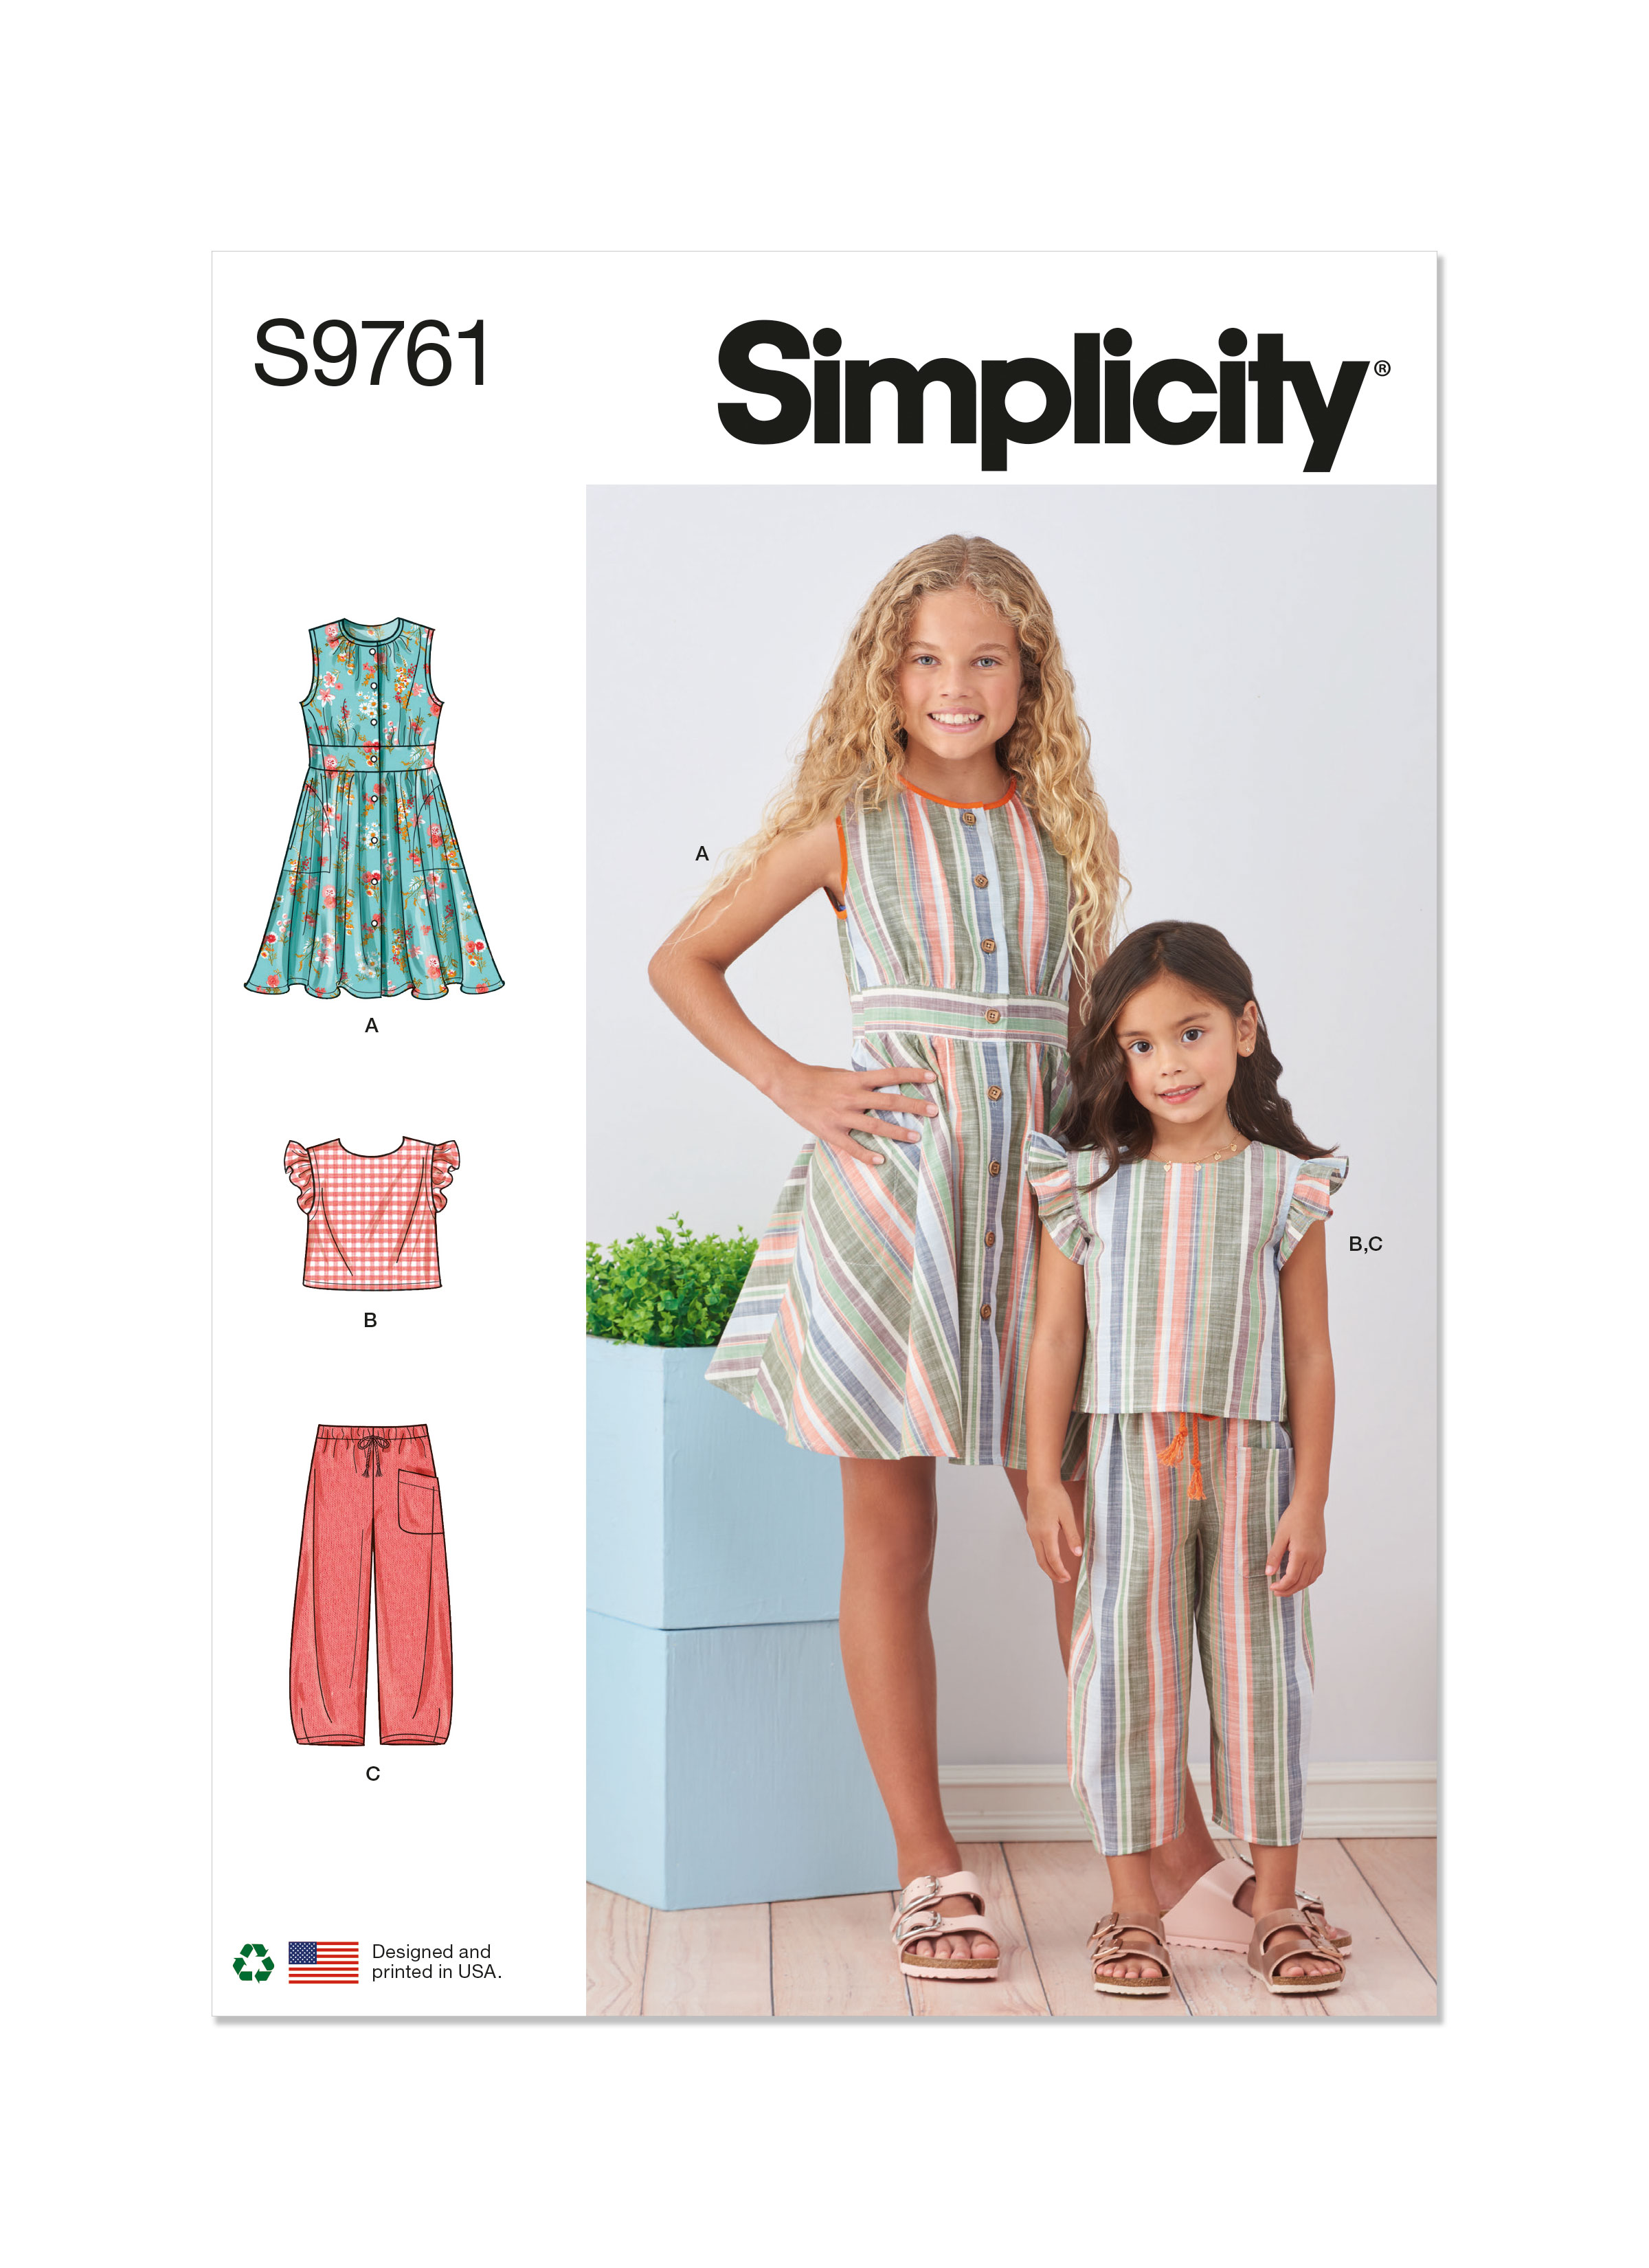 Simplicity 2469 Girl's Easy to Sew Dress, Top, Capri Pants and Jacket  Sewing Pattern Size 7, 8, 10, 12, 14 UNCUT -  Canada